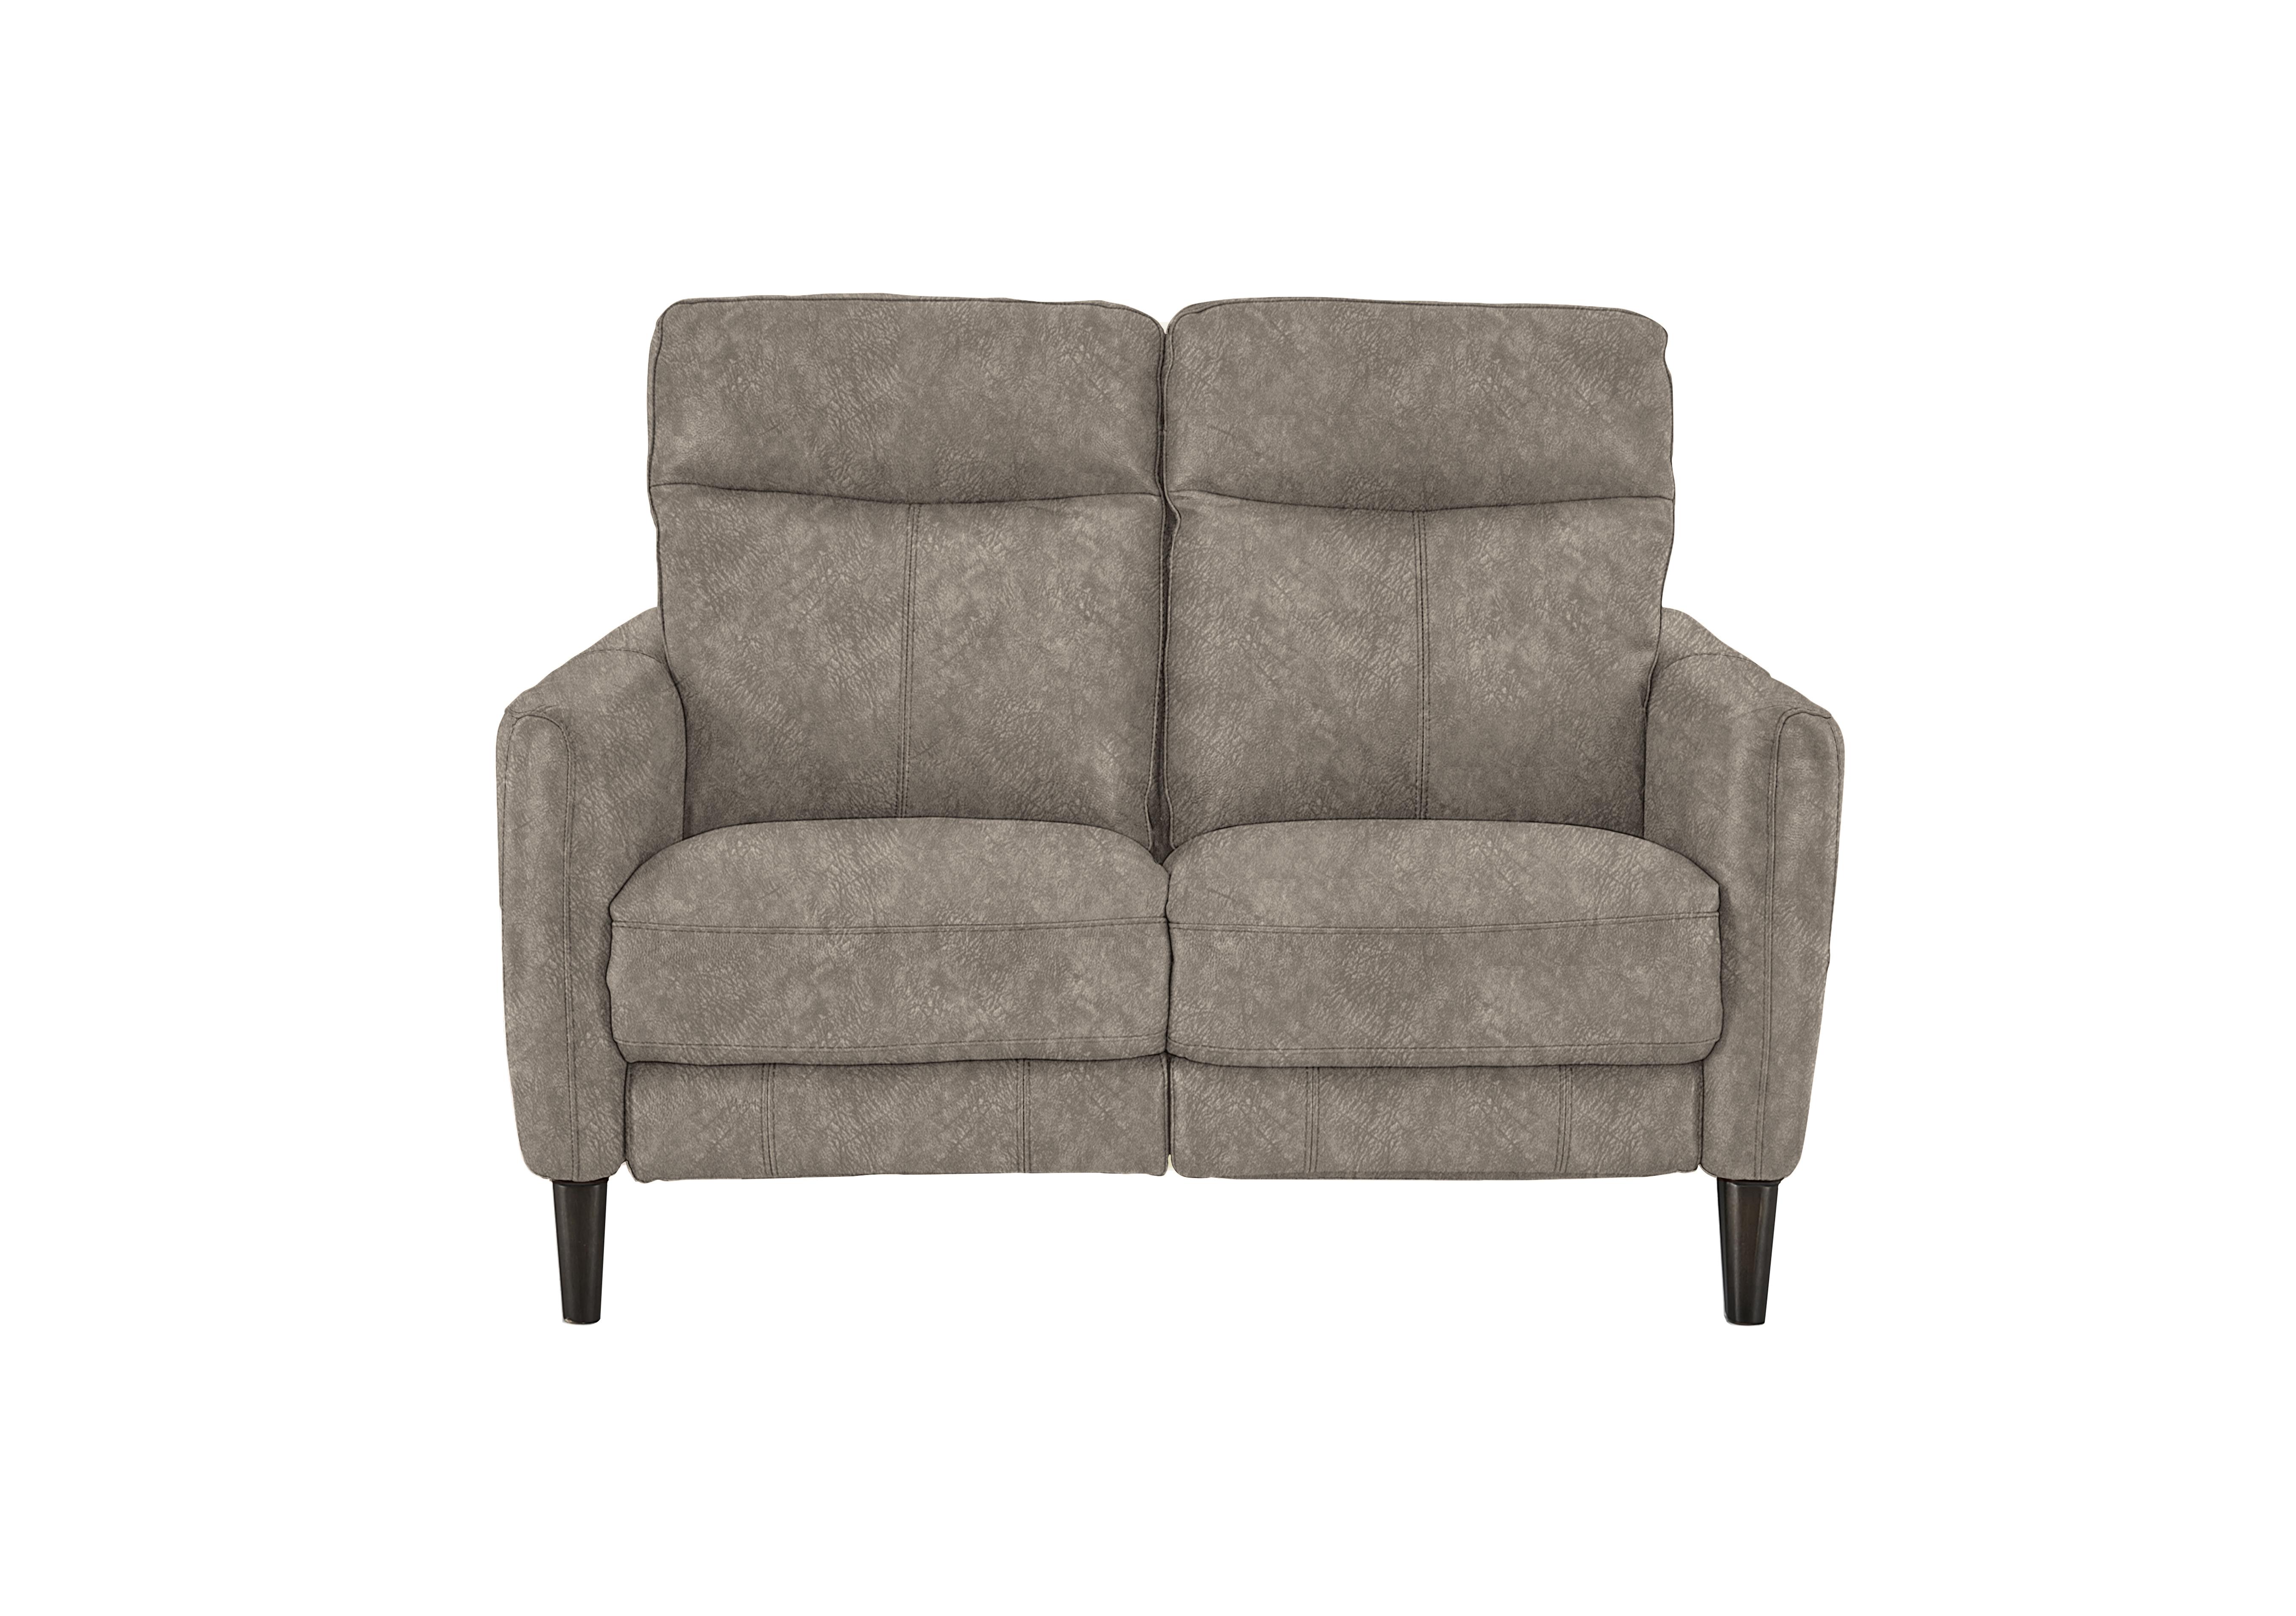 Compact Collection Petit 2 Seater Fabric Sofa in Bfa-Bnn-R29 Fv1 Mink on Furniture Village